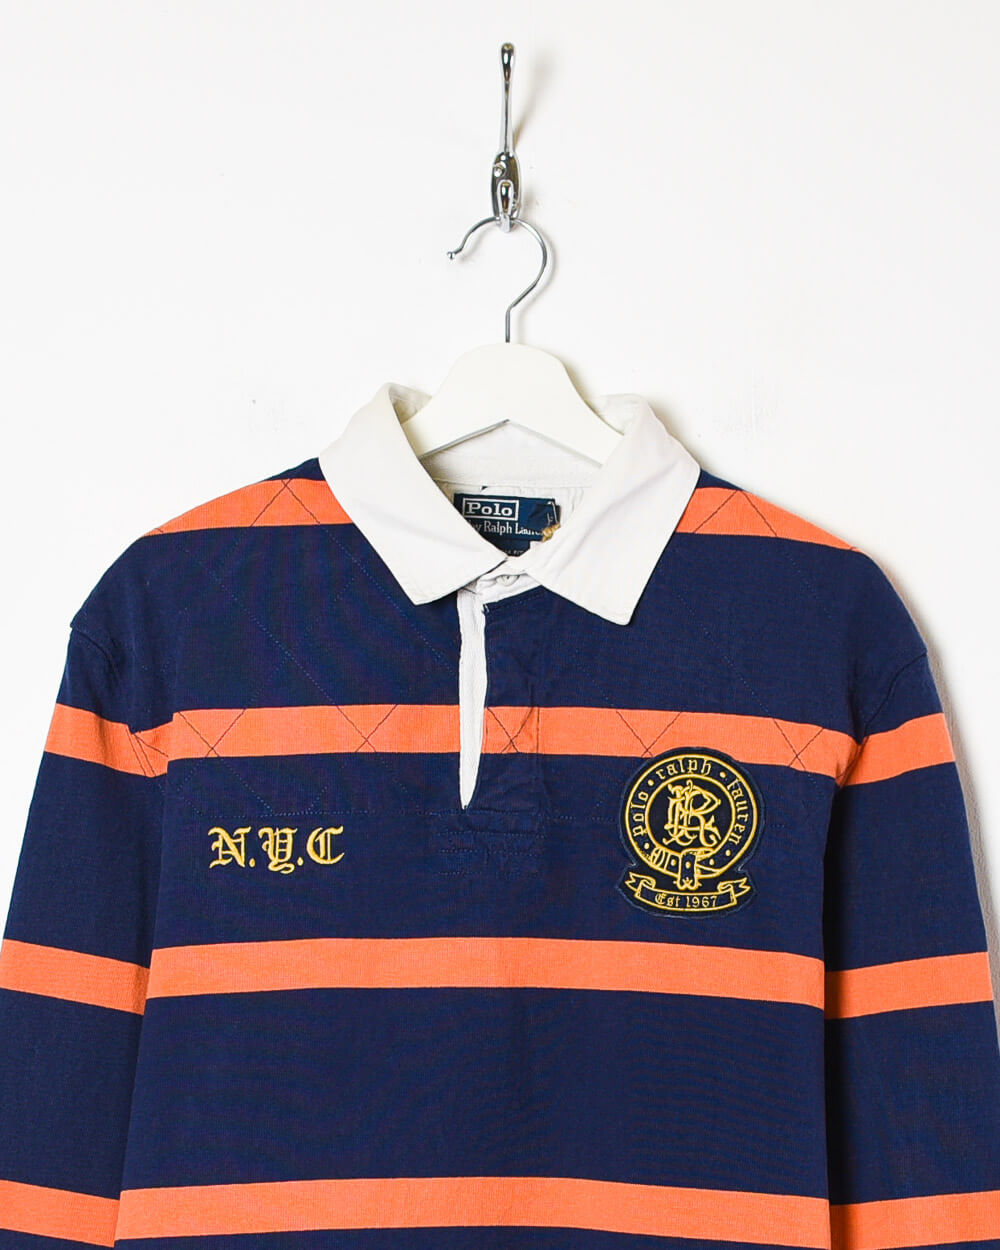 Navy Polo Ralph Lauren Rugby Shirt - X-Large